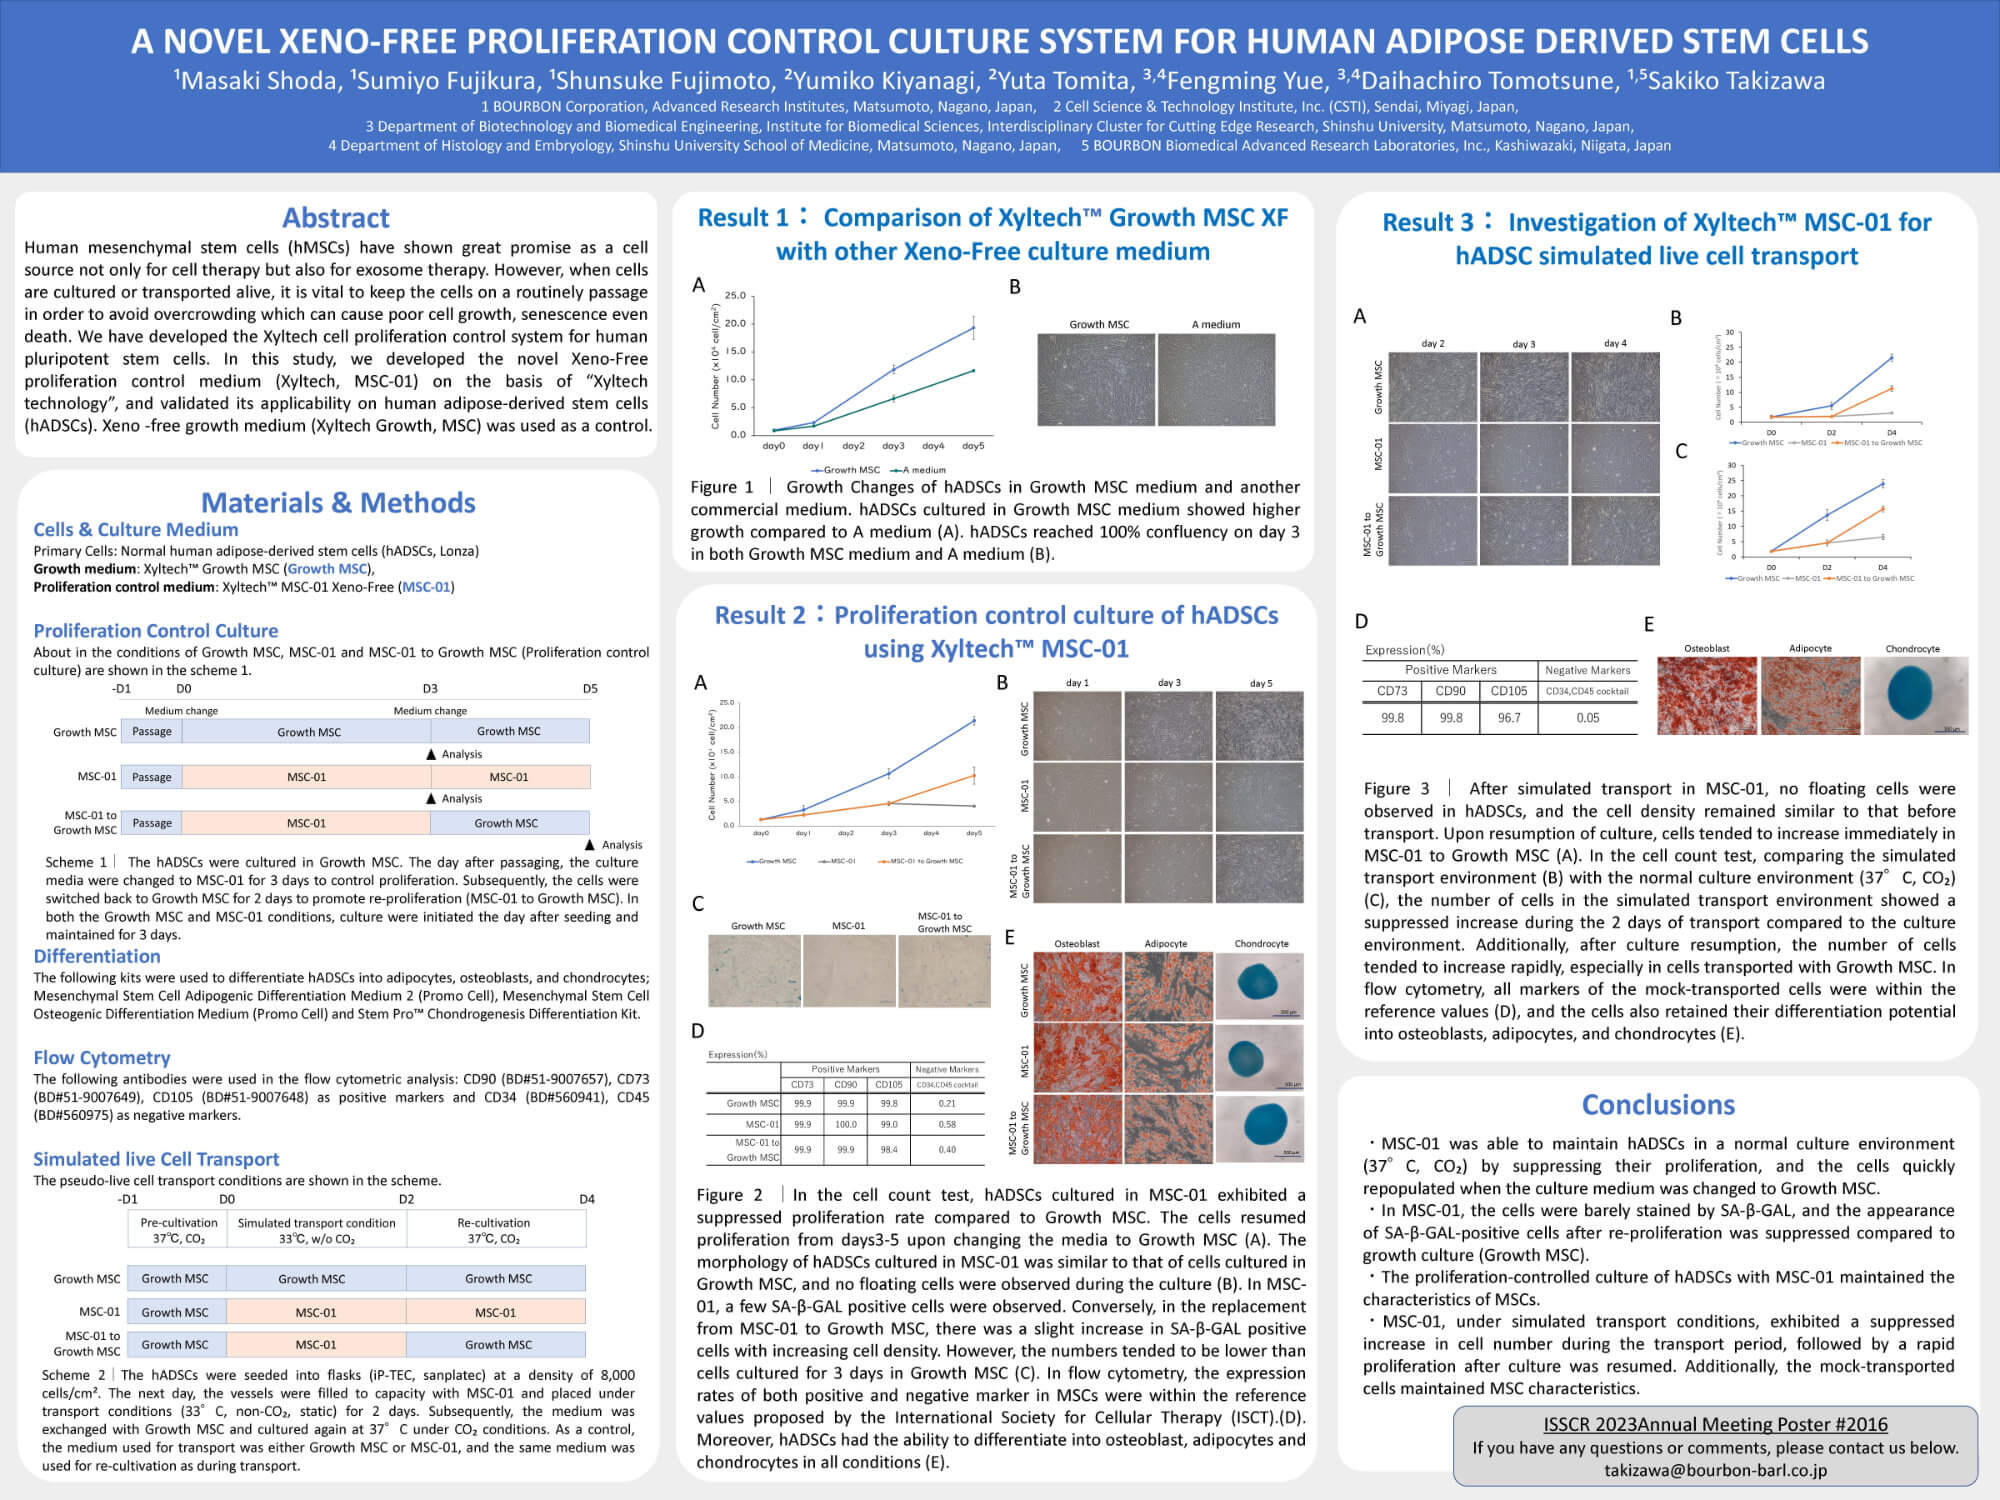 Poster: A Novel Xeno-Free Proliferation Control Culture System for Human Adipose Derived Stem Cells